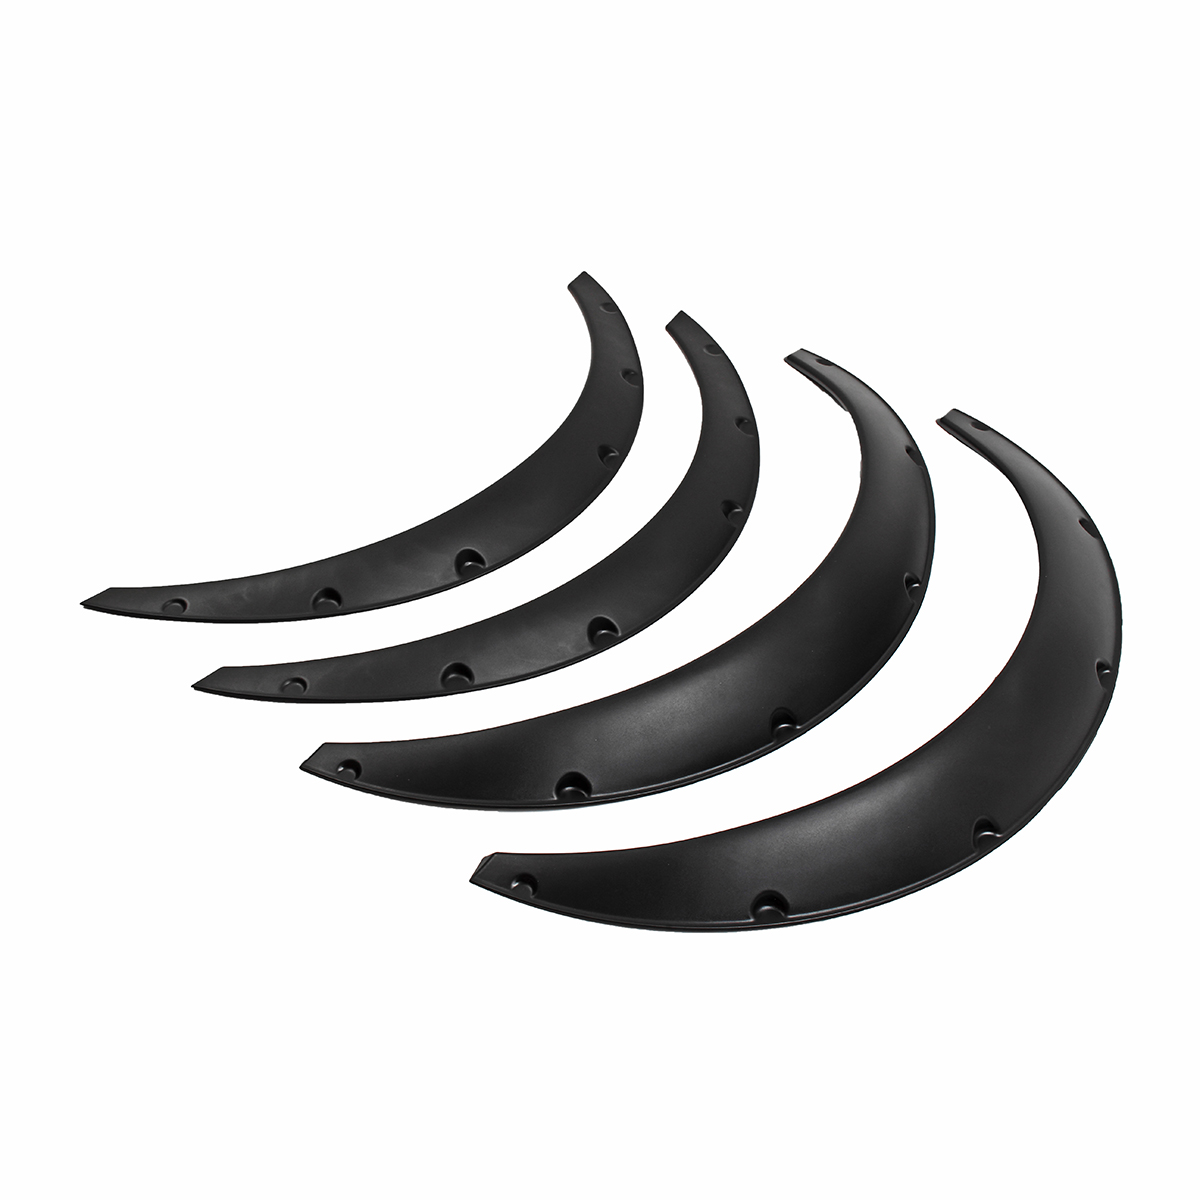 4PCS 90mm Universal Car Fenders Kit Flares Wheel Arch Trim Strip Eyebrow Protector Cover Automobiles Replacement Parts Black